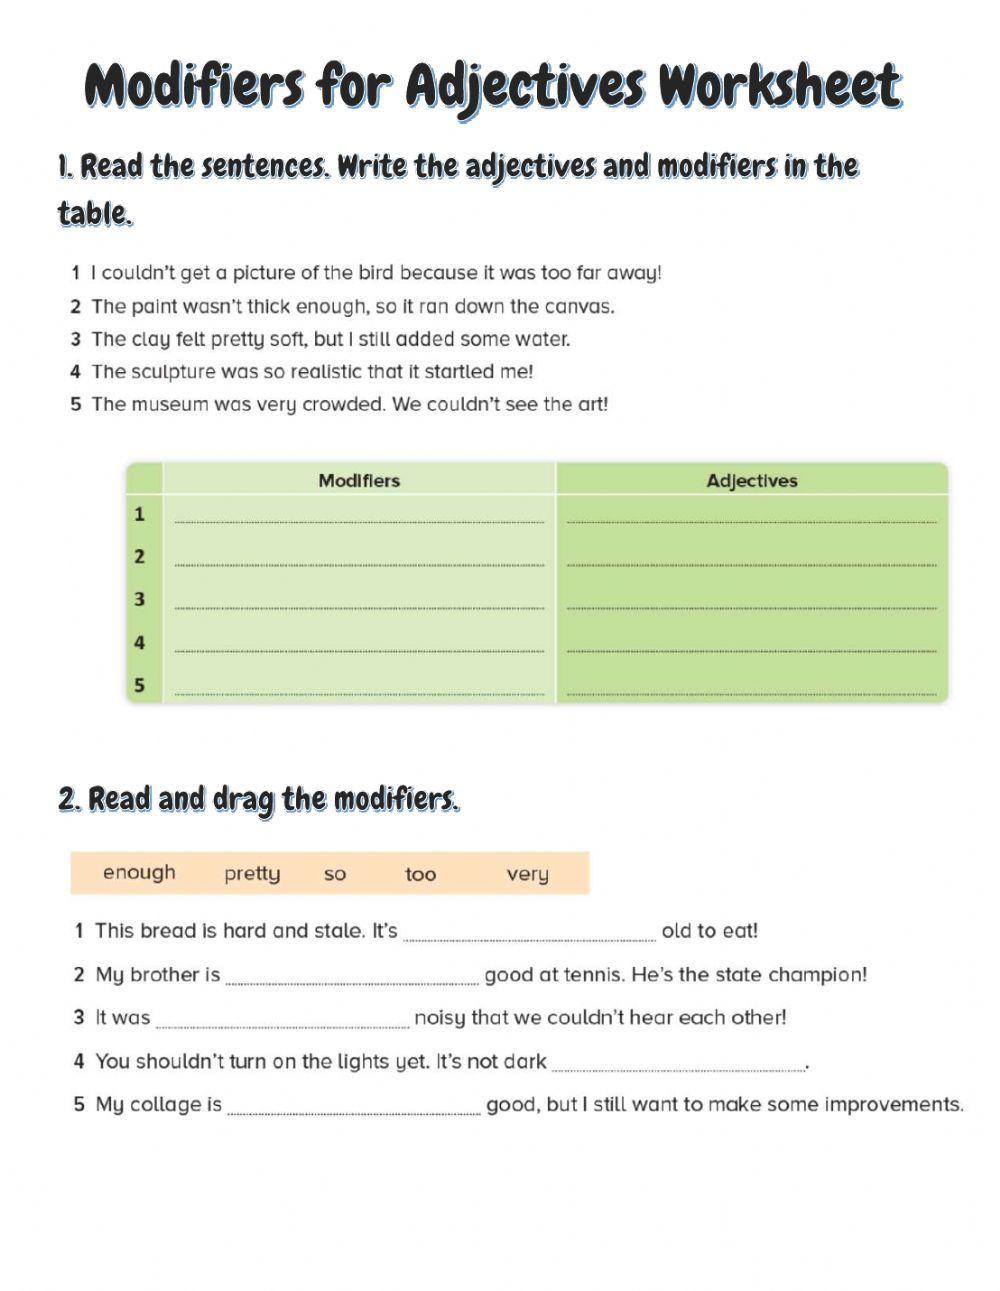 Modifiers for Adjectives